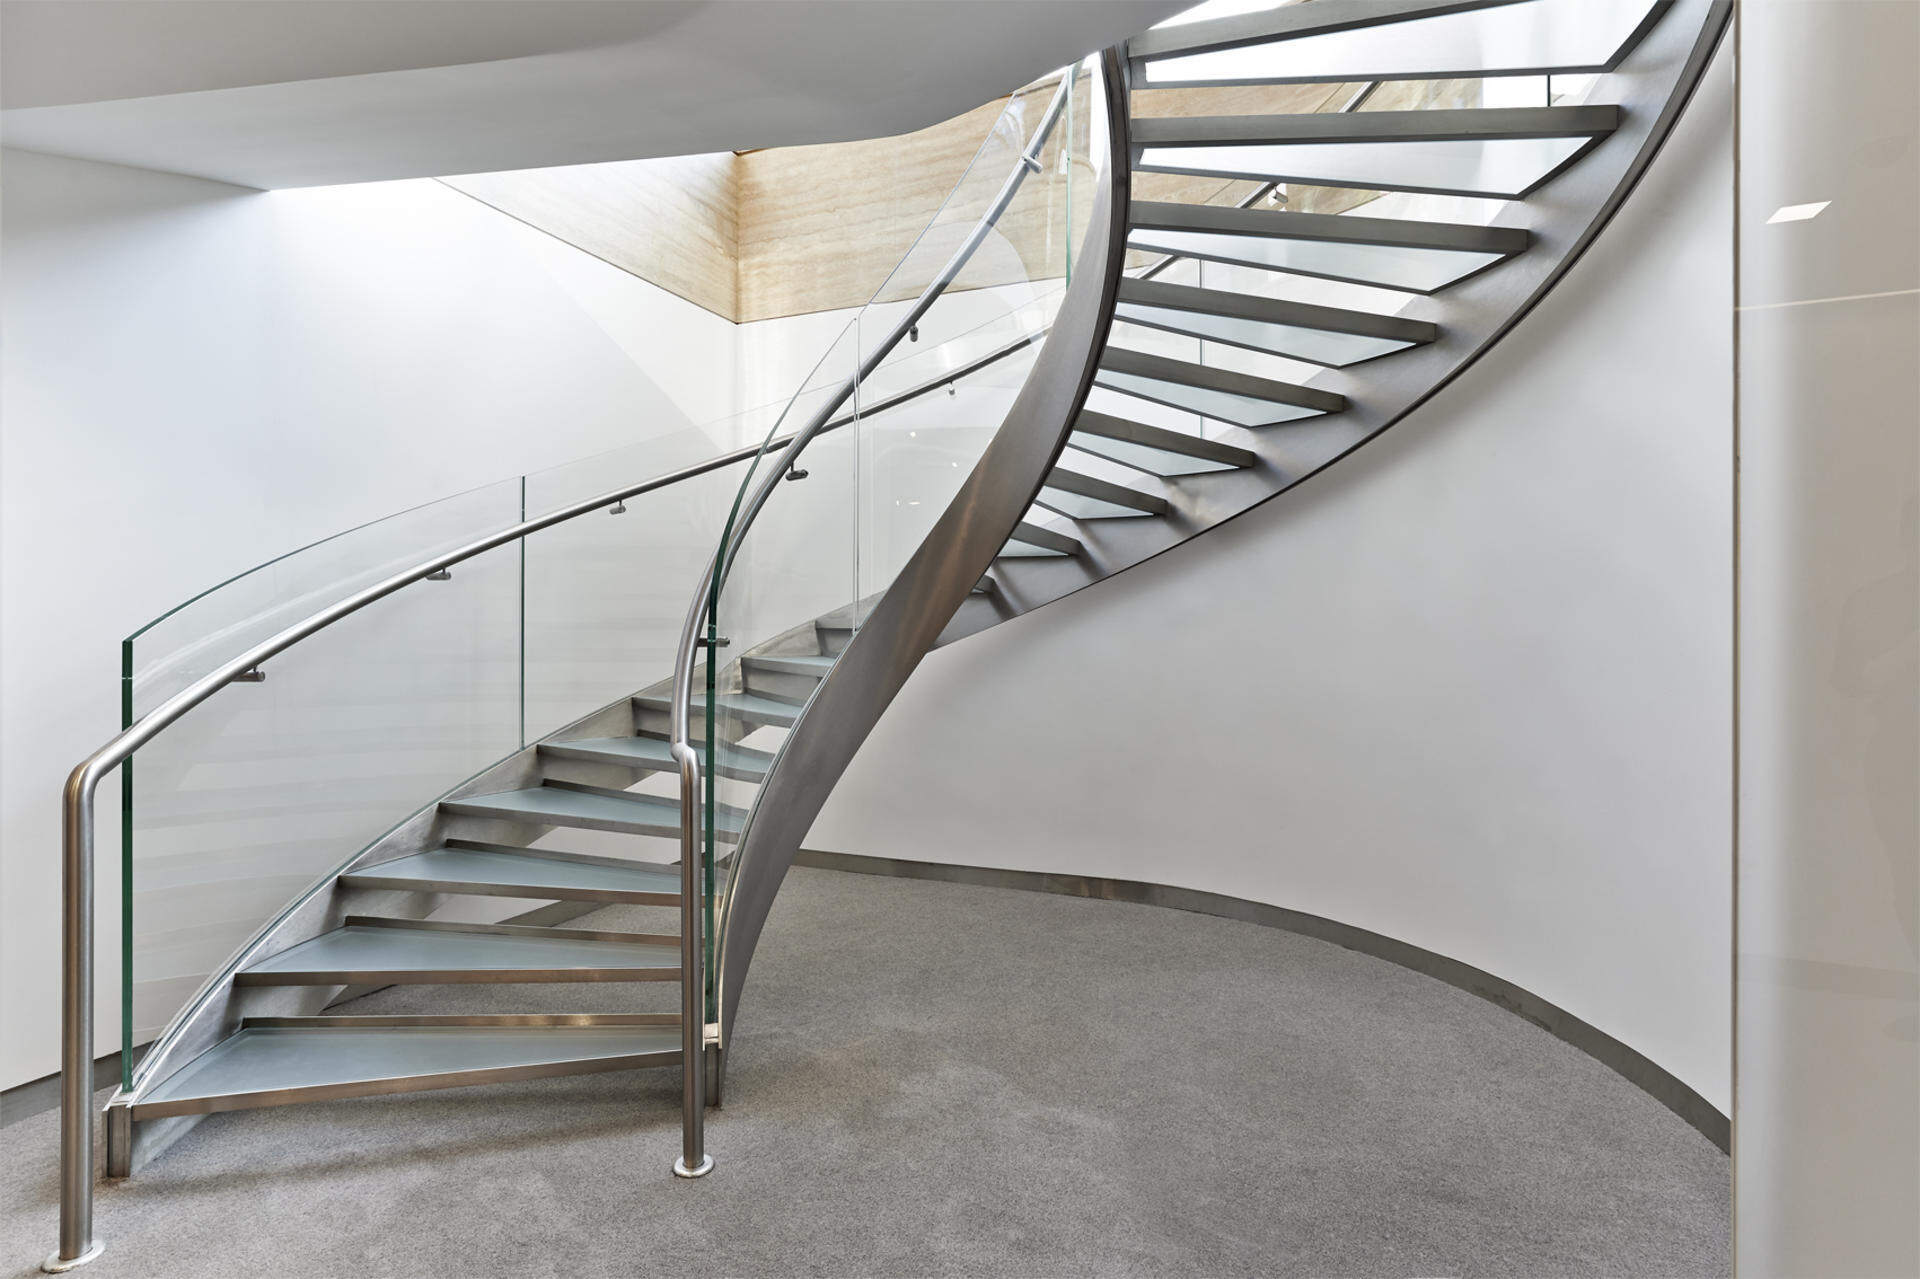 What are the Benefits of Steel Staircase Design in Modern Homes?